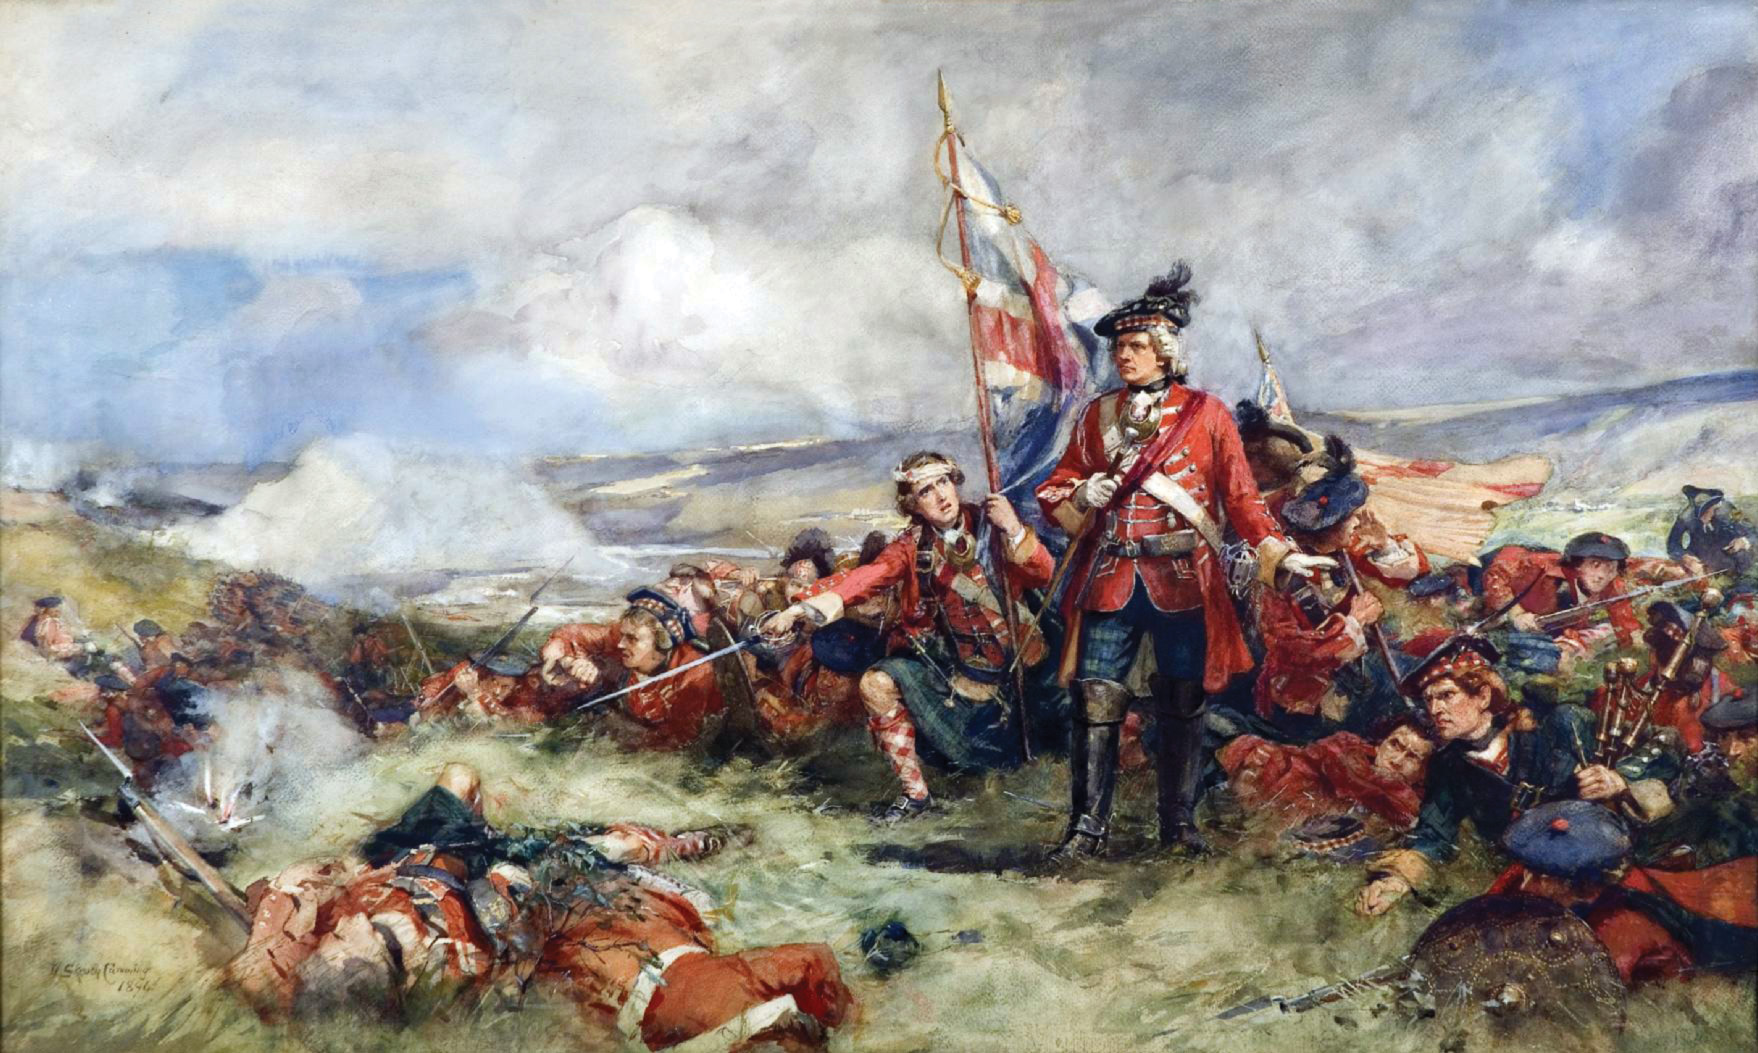 Colonel Robert Munro’s 42nd Royal Highland Regiment, known as the Black Watch, advances into withering French fire at the start of the battle. 